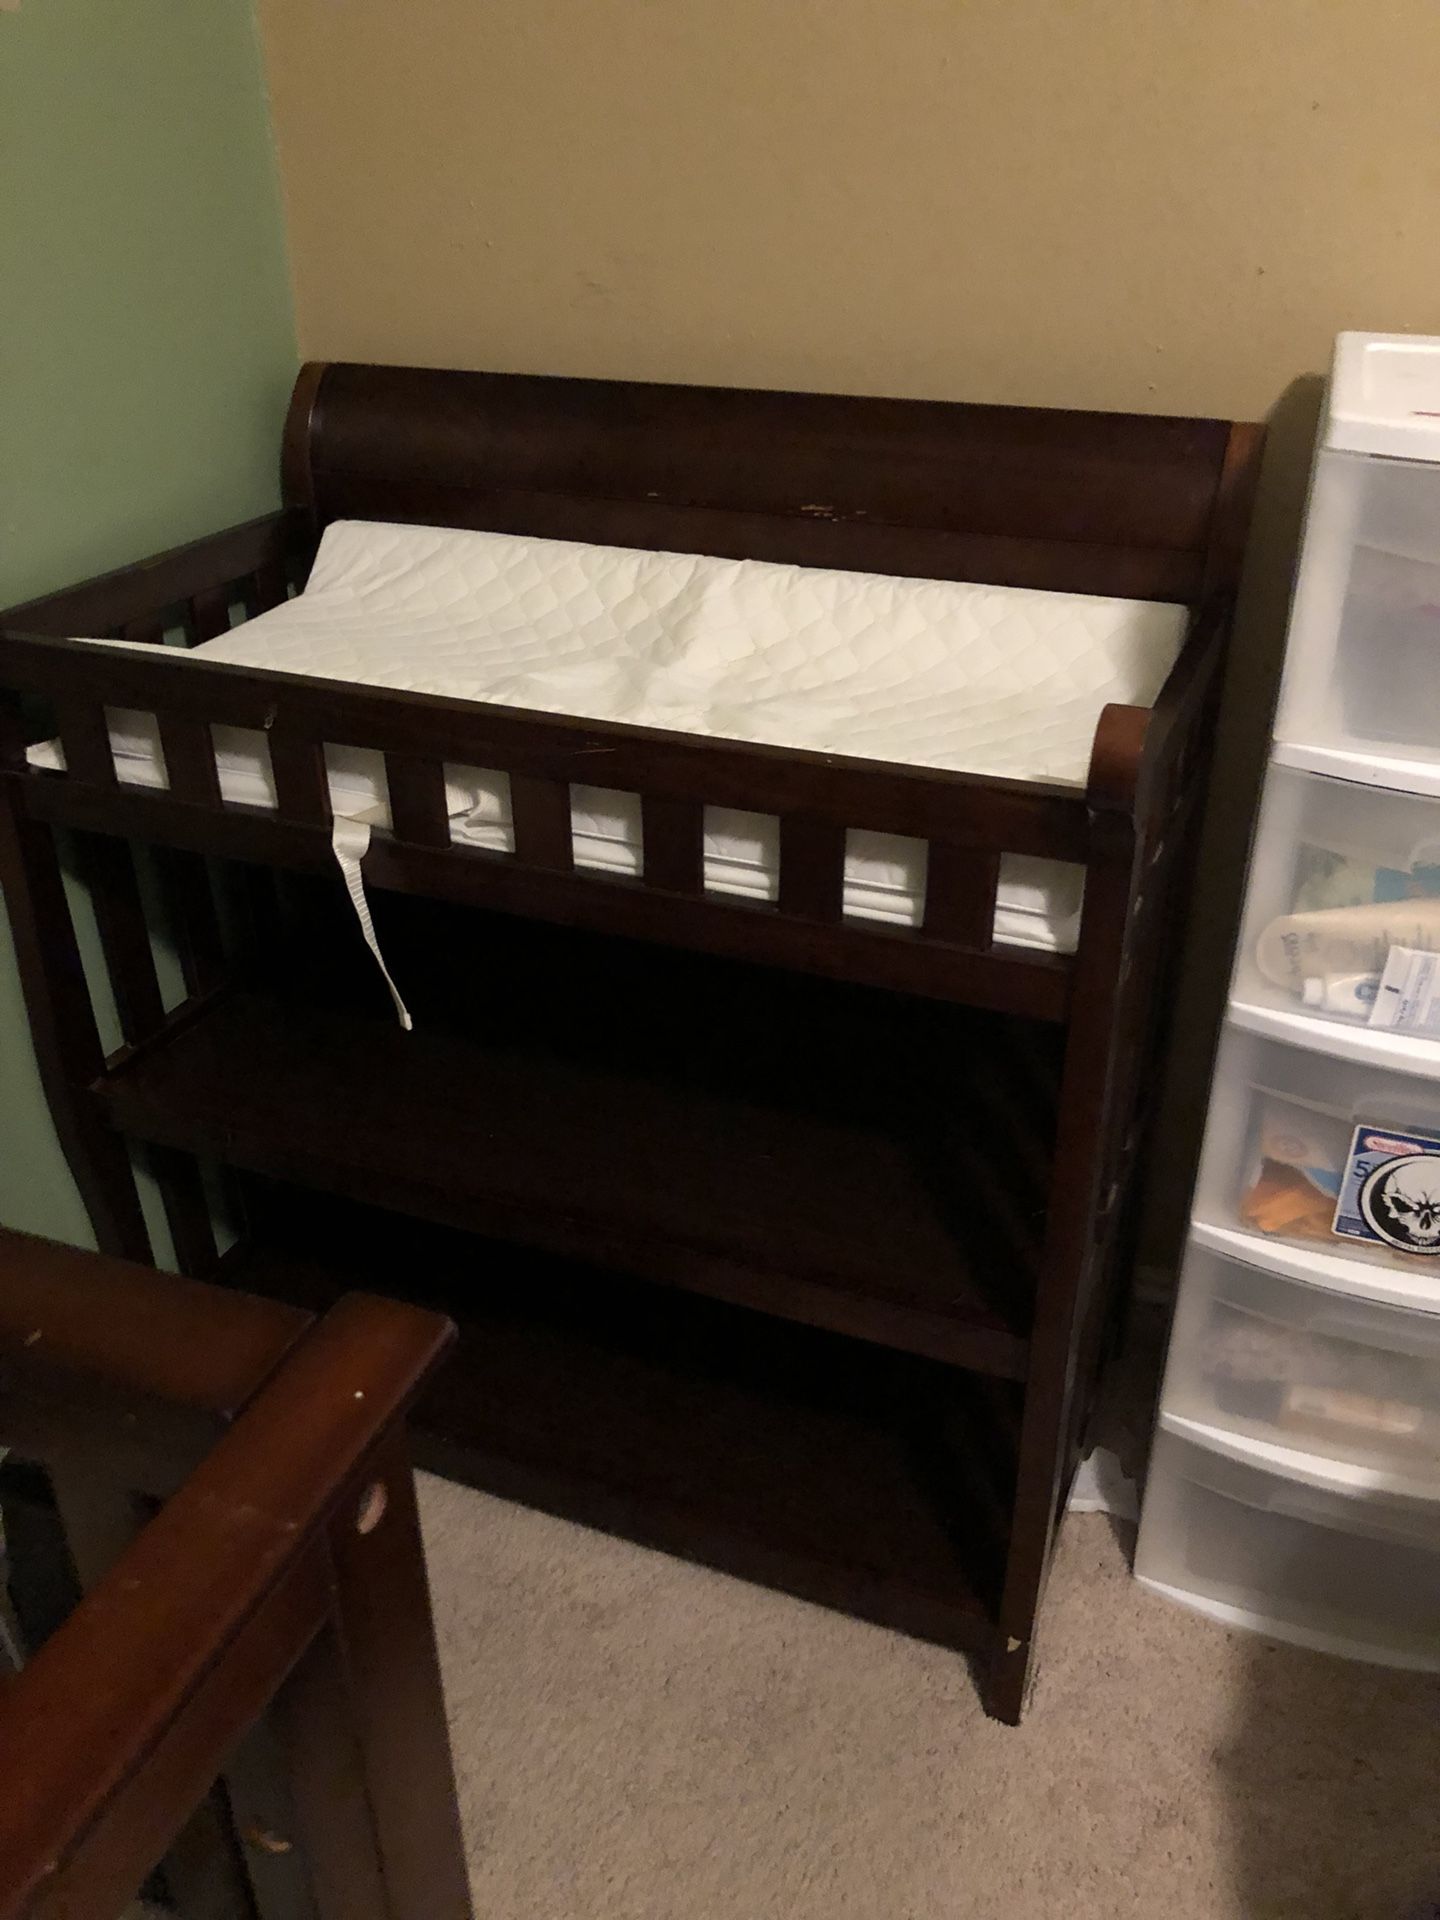 Three tier changing table